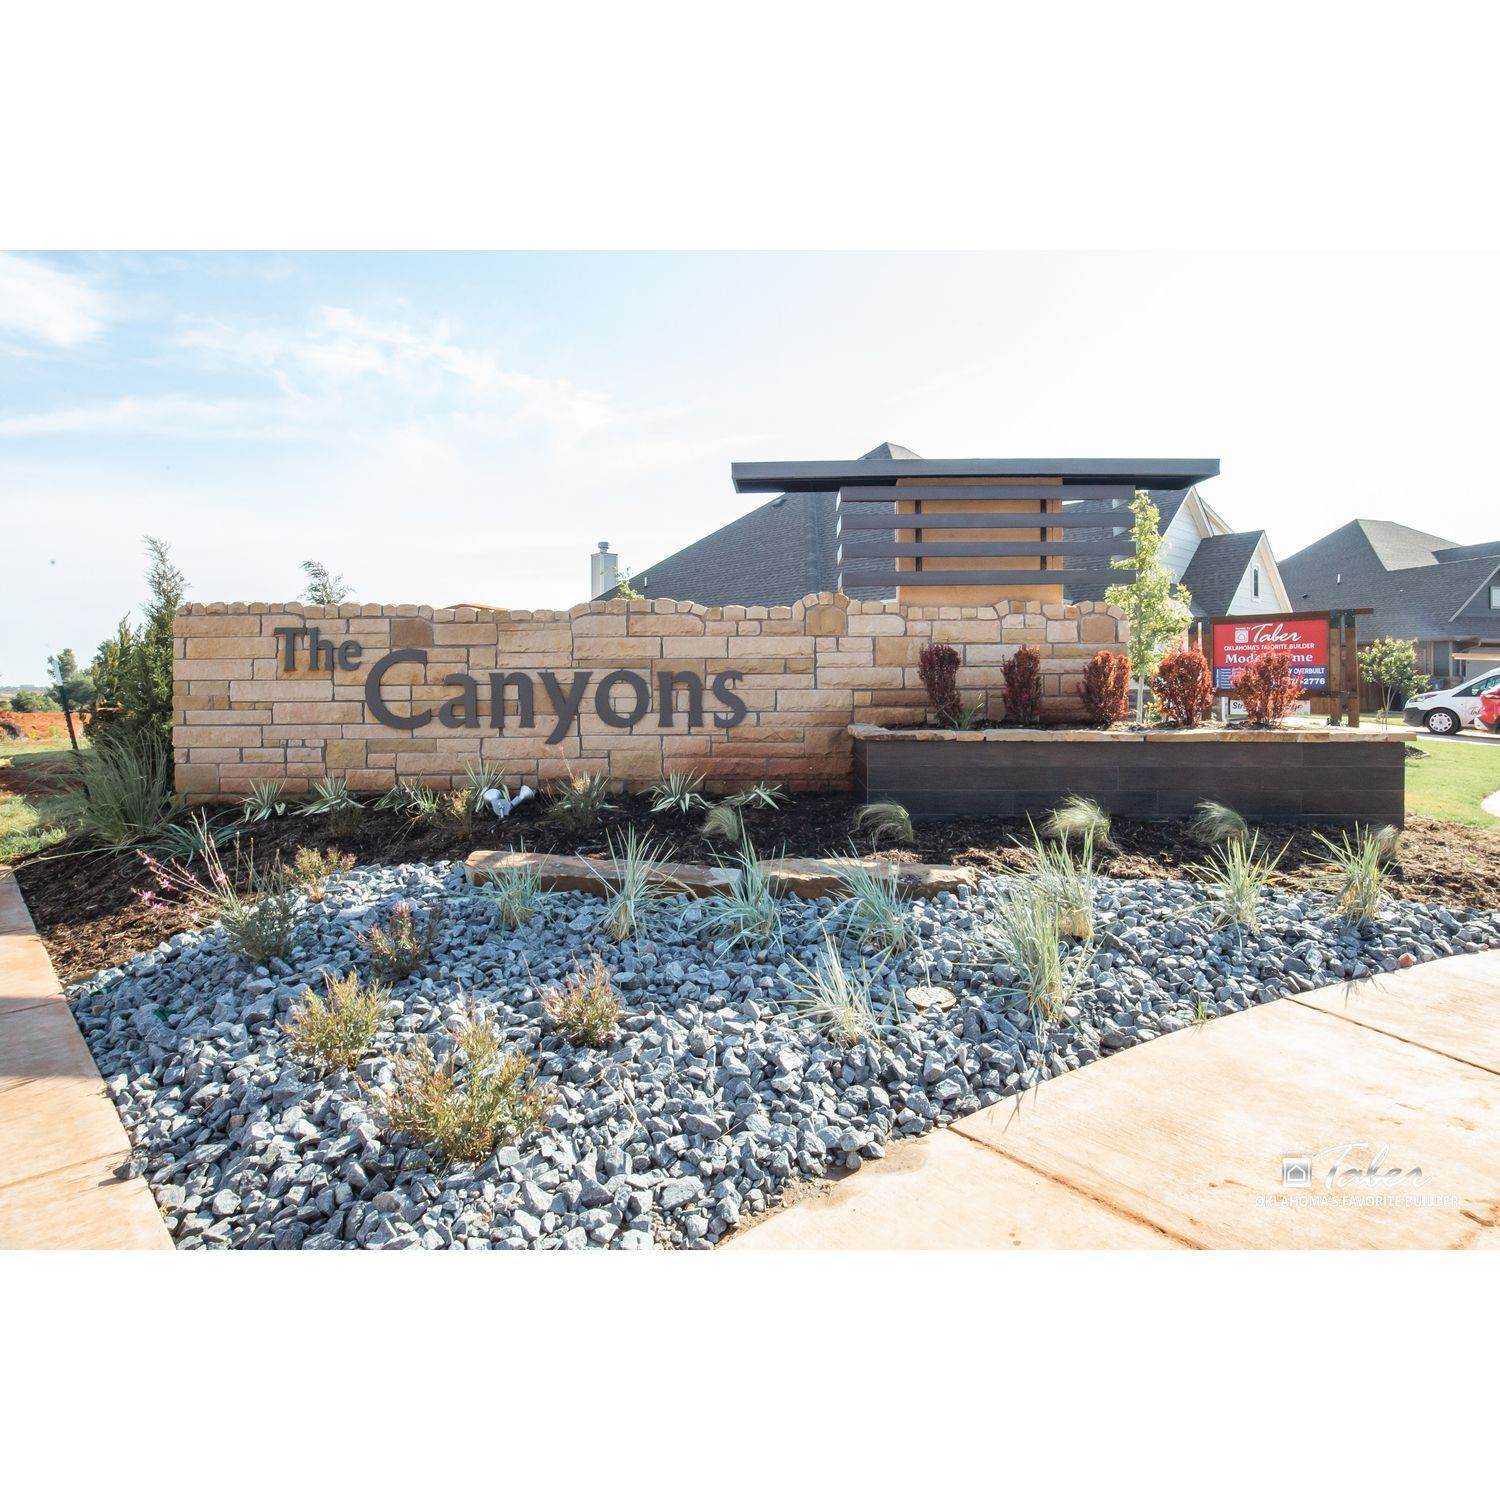 49. Canyons bâtiment à 10533 SW 52nd St, Mustang, OK 73064